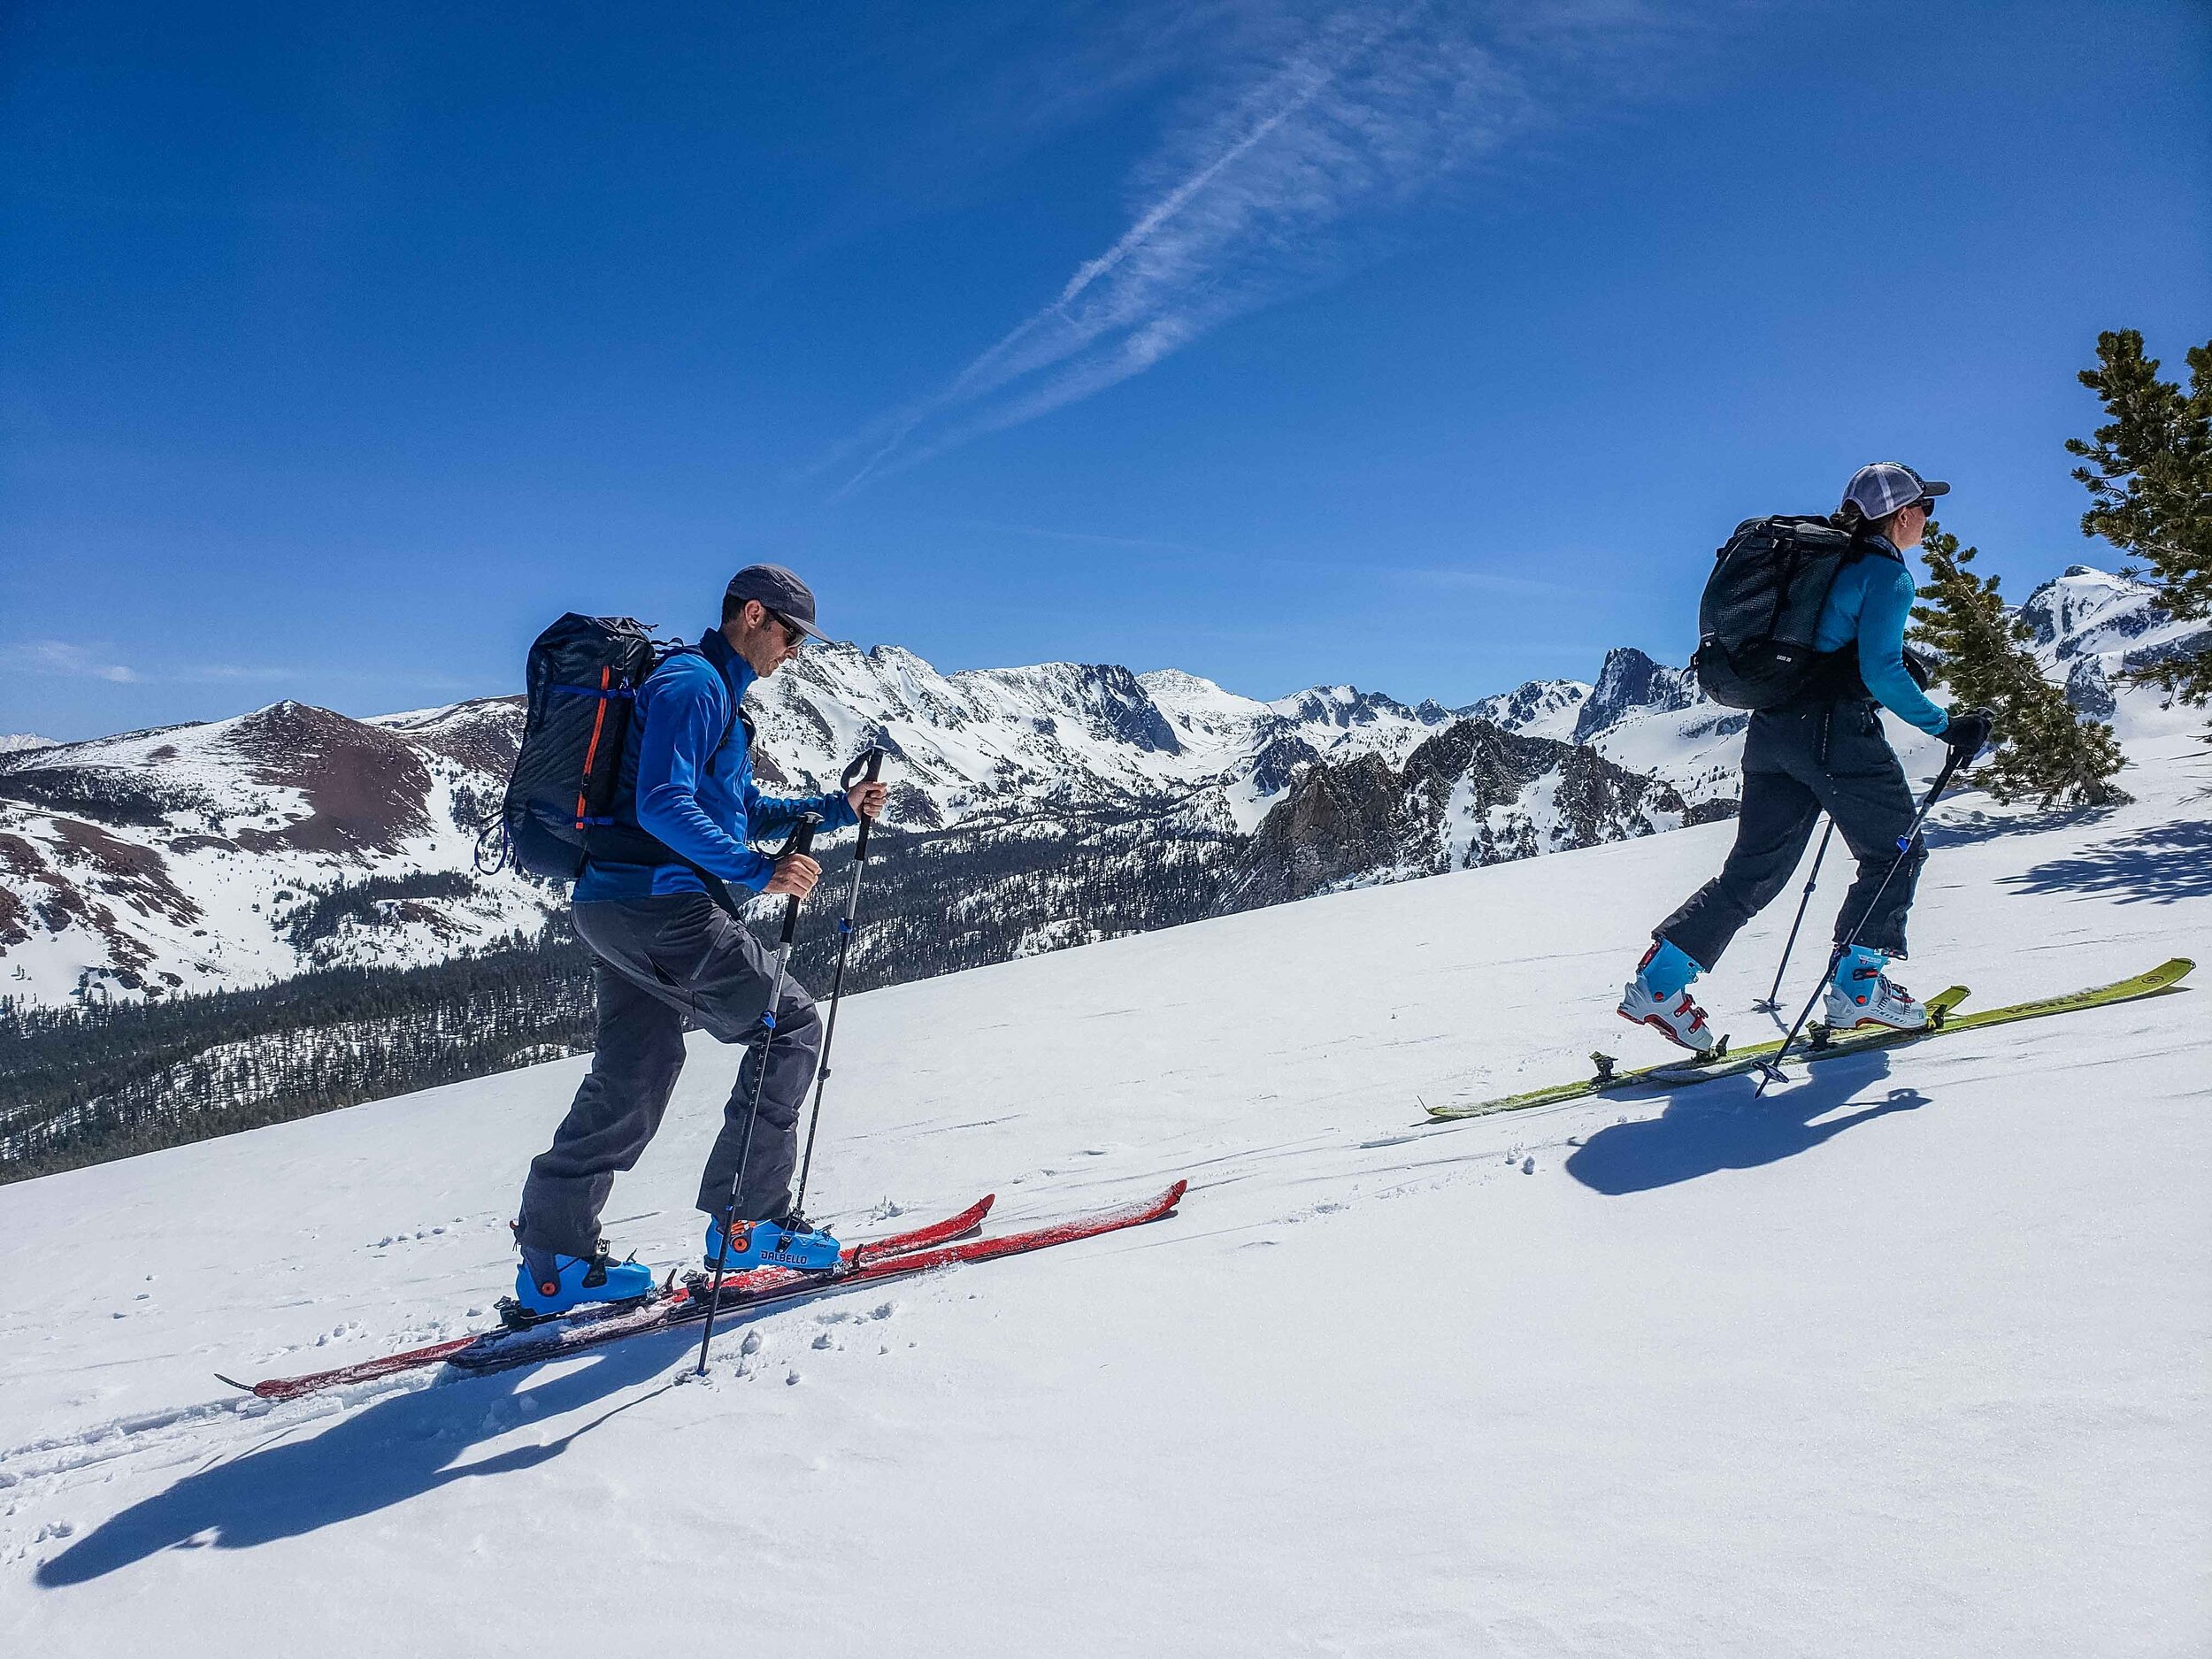 Buying backcountry skiing, alpine touring and avalanche safety gear